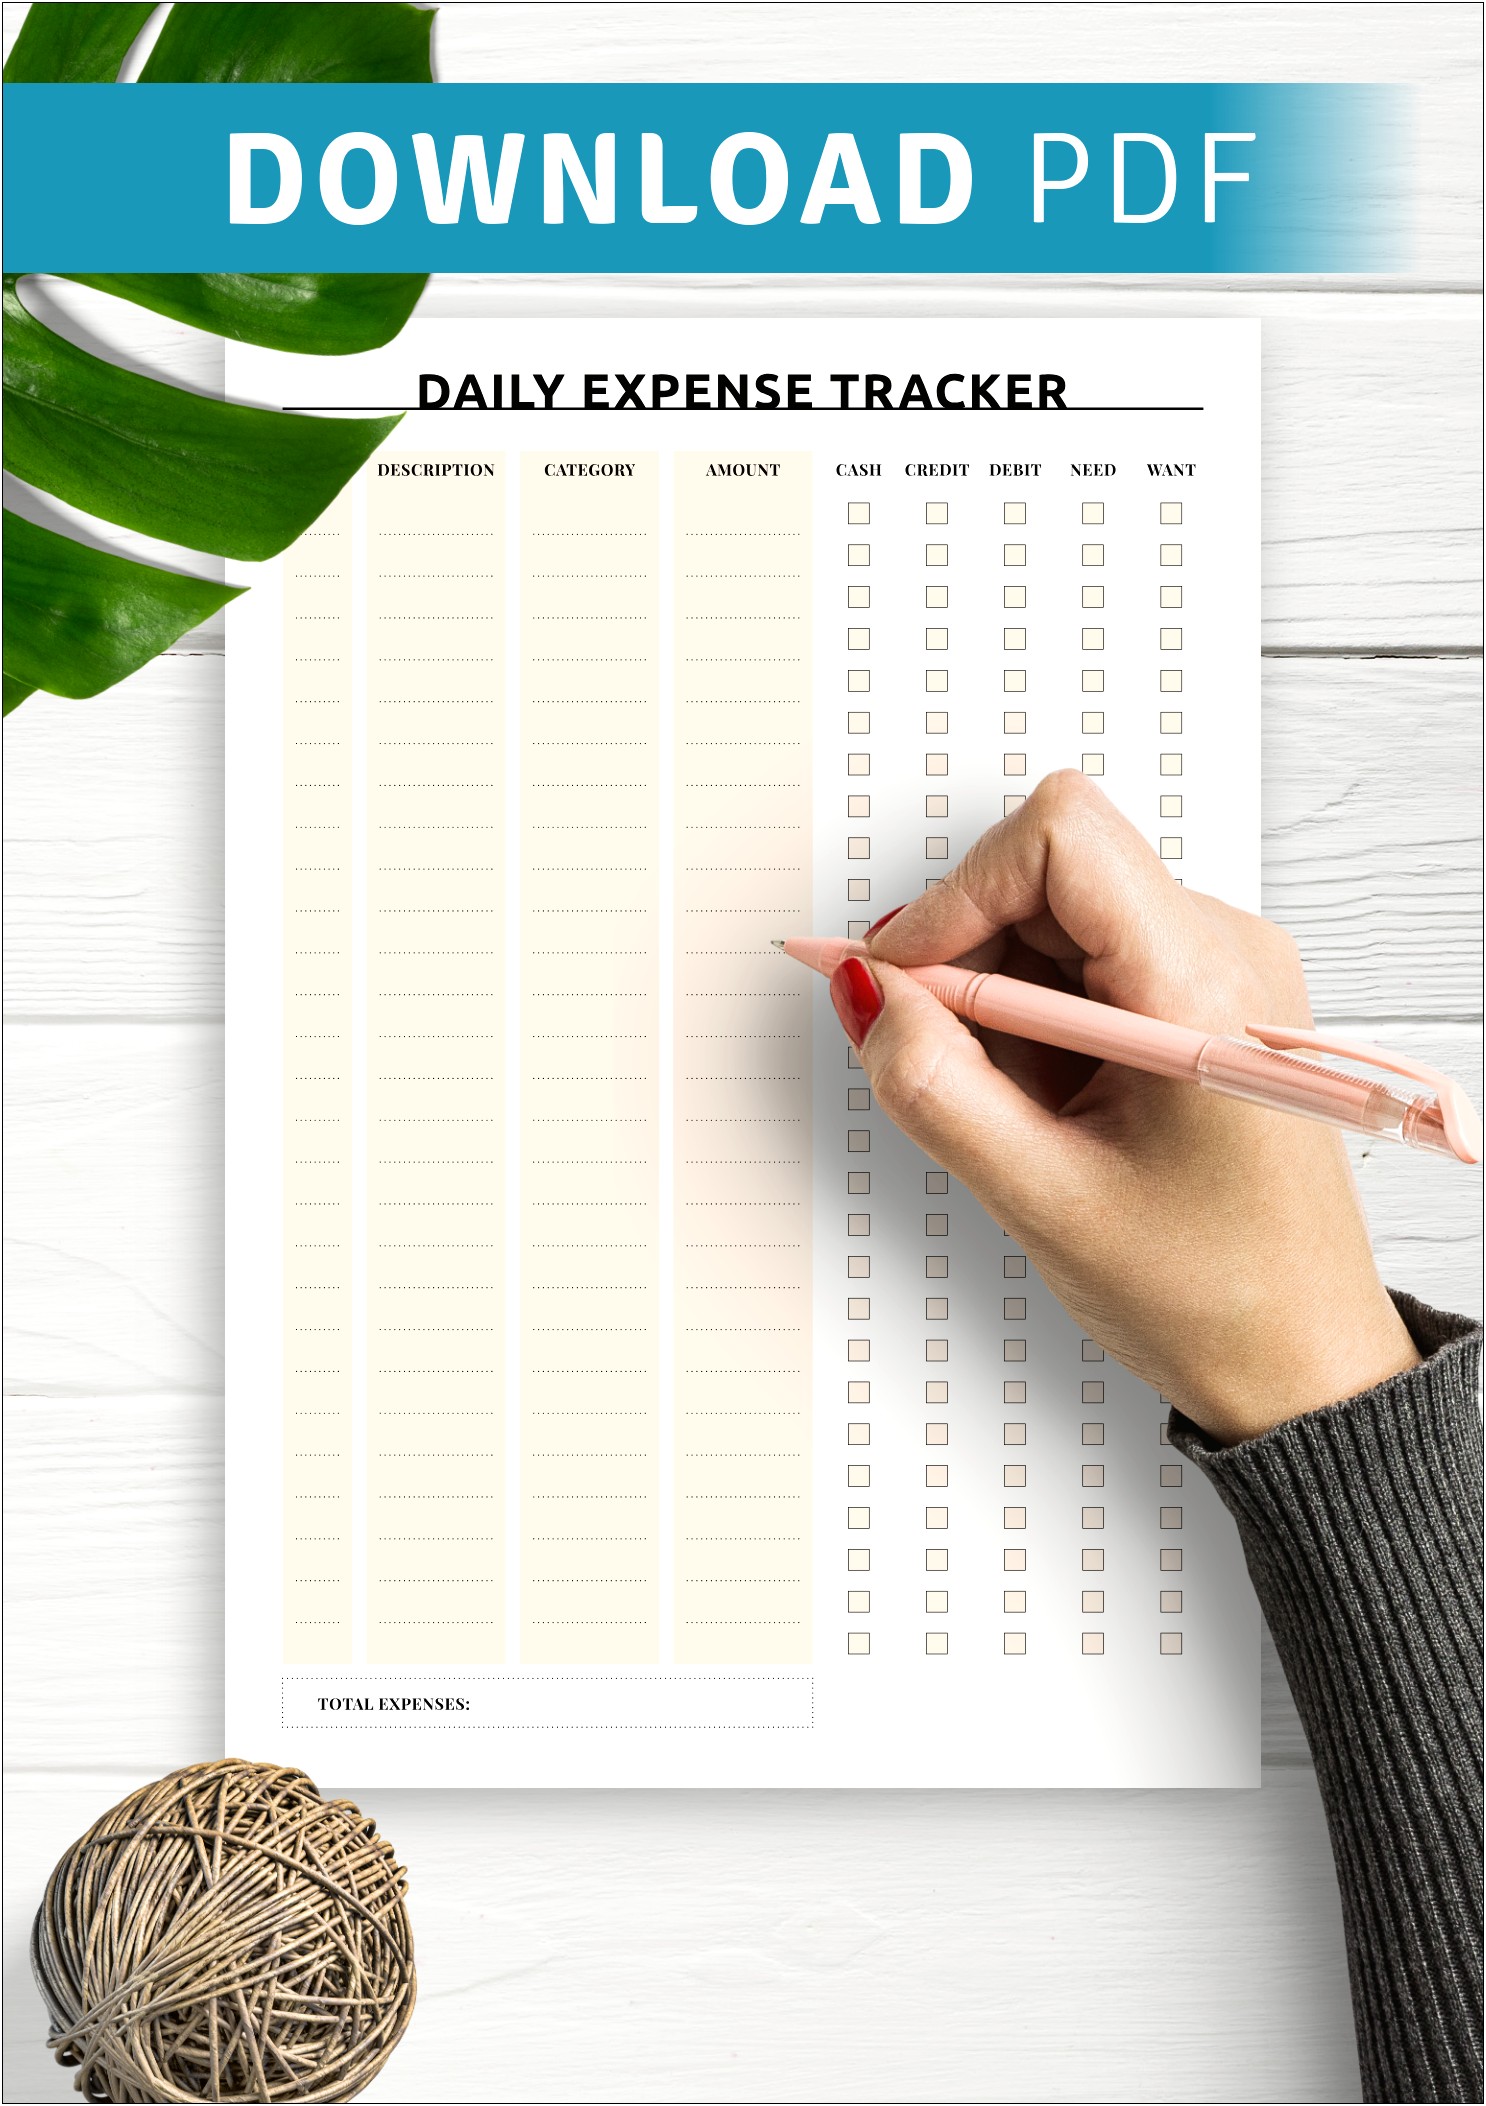 daily-expense-tracker-template-free-printable-templates-resume-designs-8a1bw6nvq7